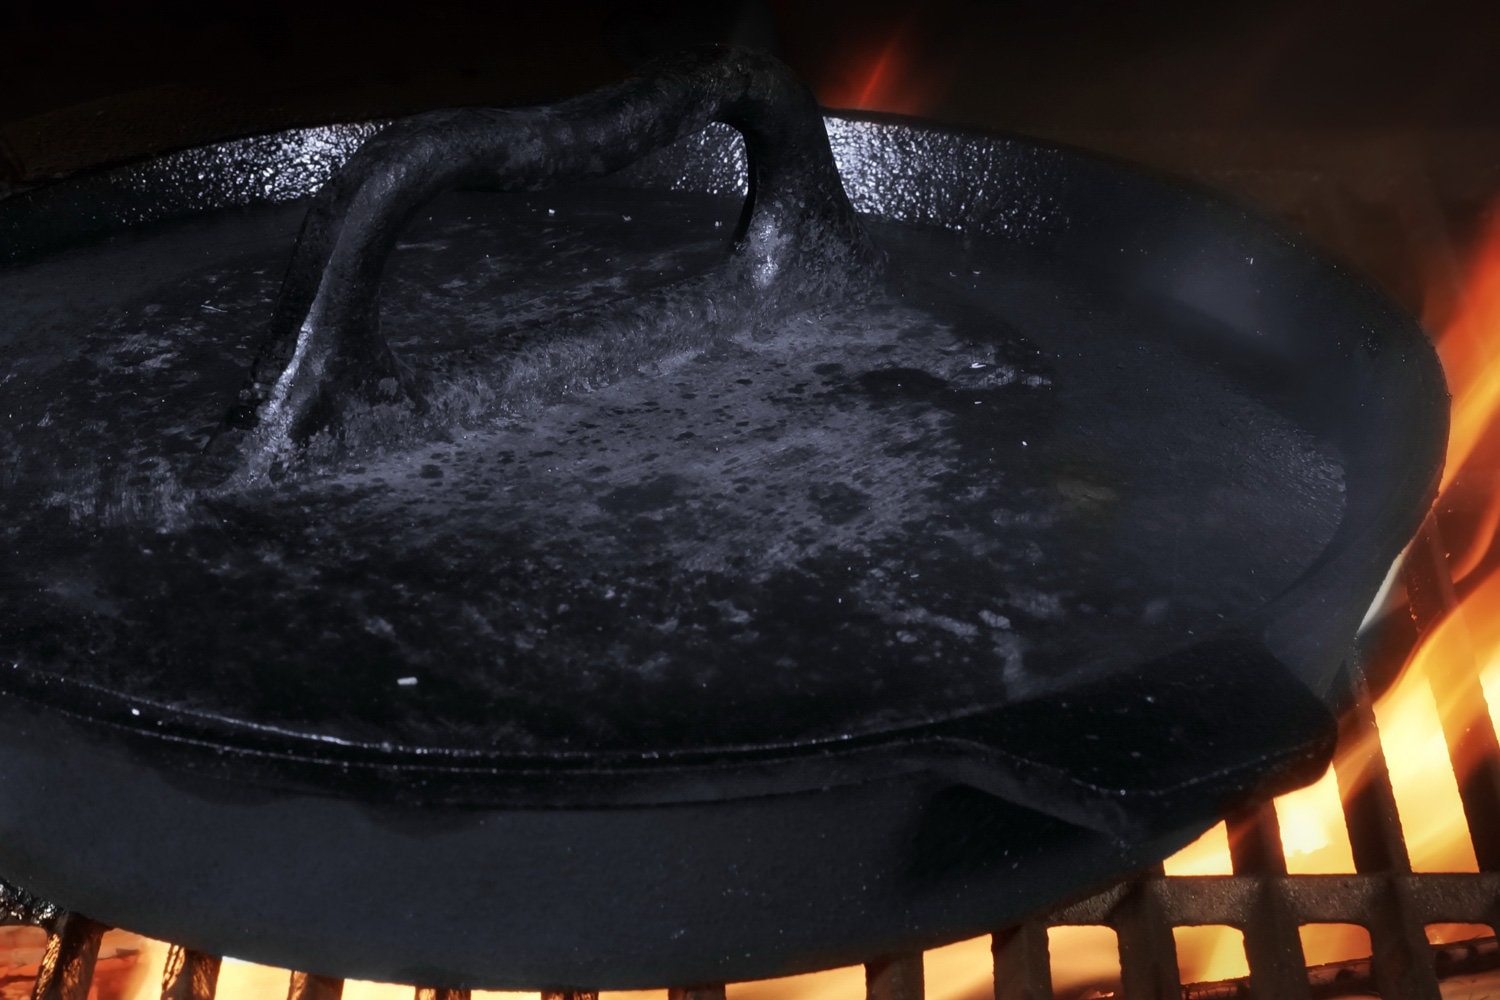 Frying Pan With Heavy Lid. Grill Pan On Hot Flaming BBQ Grate. Cast Iron Grill Pan With Gridiron, Closeup View.